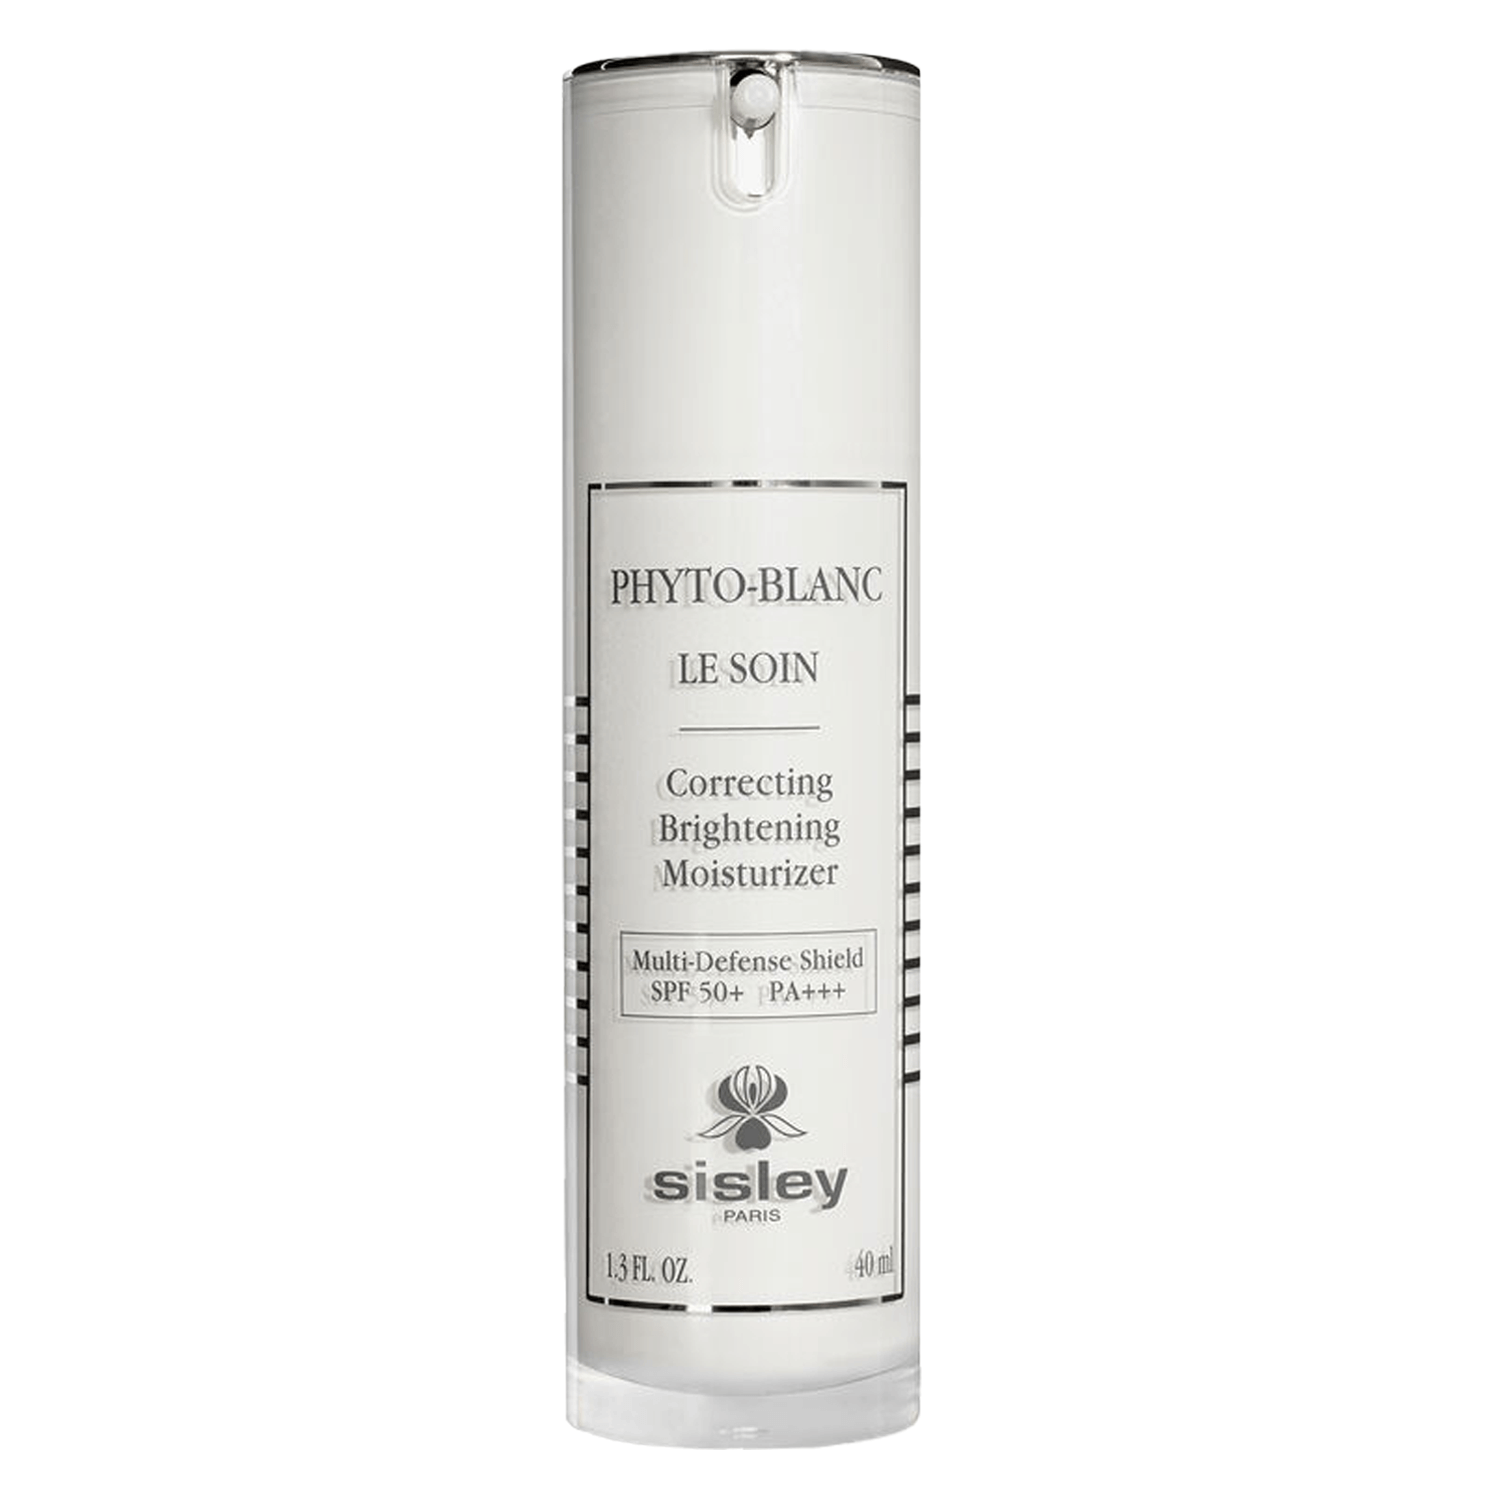 Product image from Sisley Skincare - Phyto-Blanc Le Soin Correcting Brightening Moisturizer SPF50+